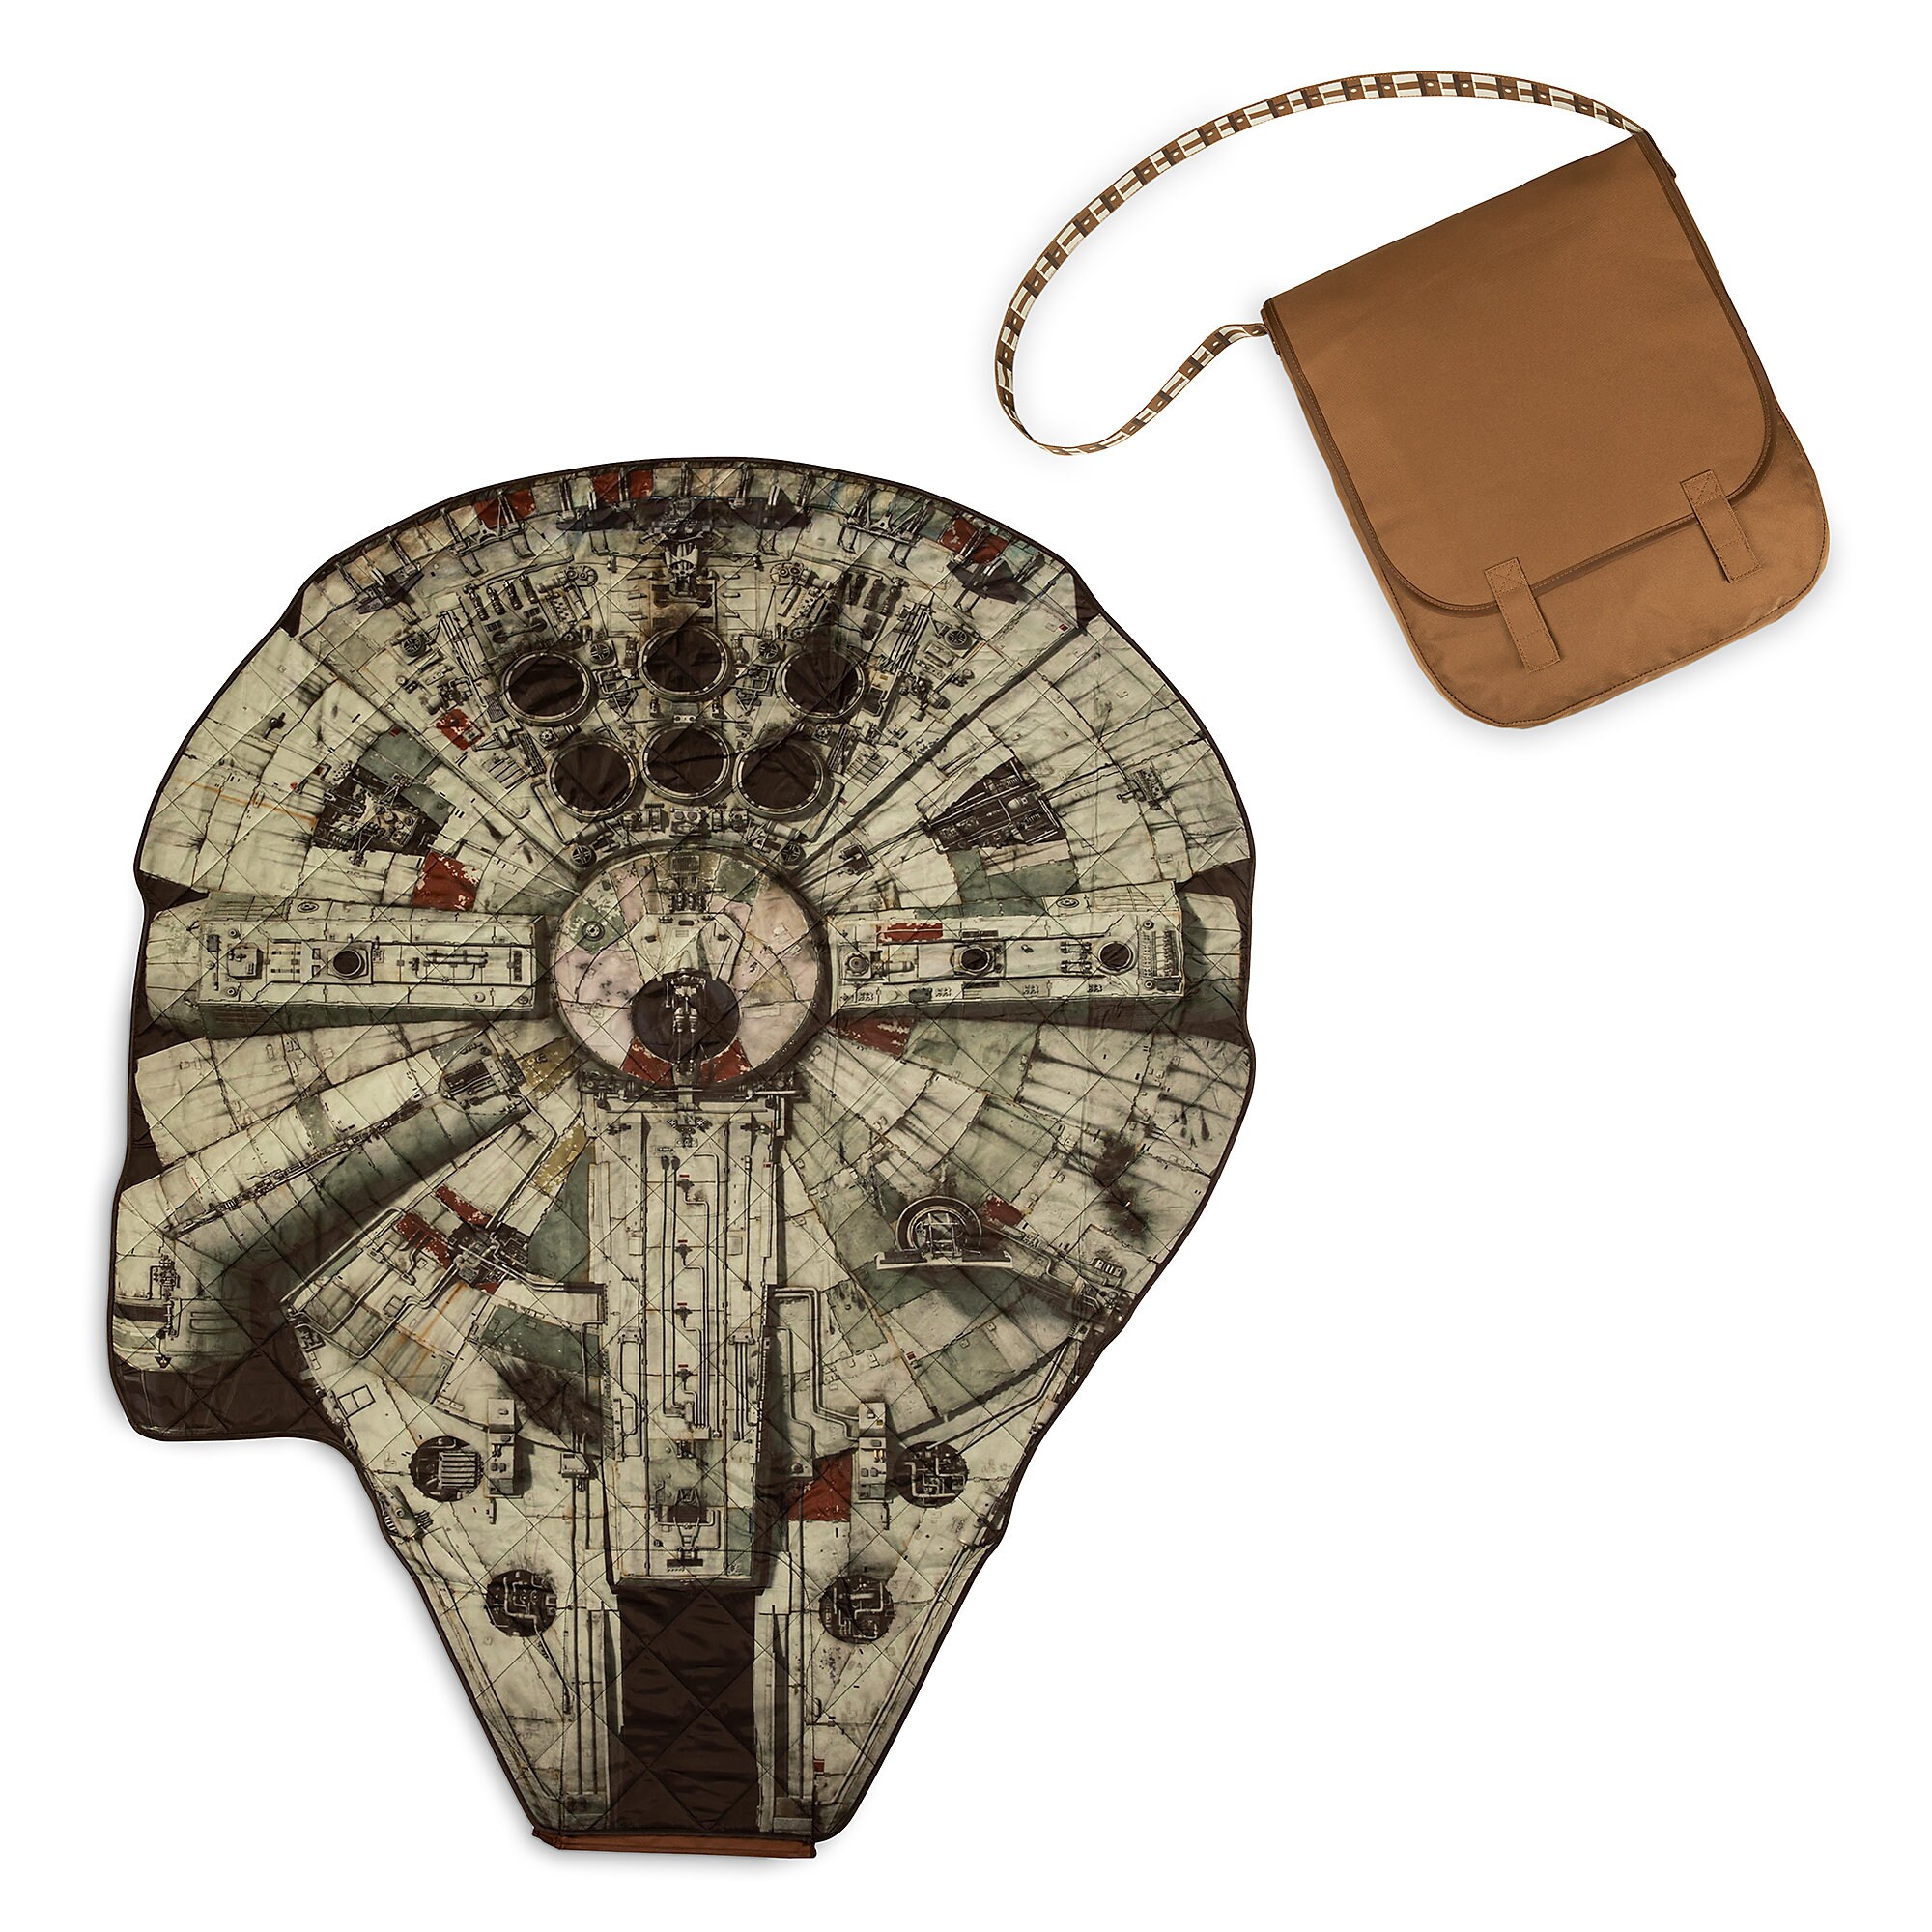 Millennium Falcon Picnic Blanket and Chewbacca Messenger Bag - Star Wars